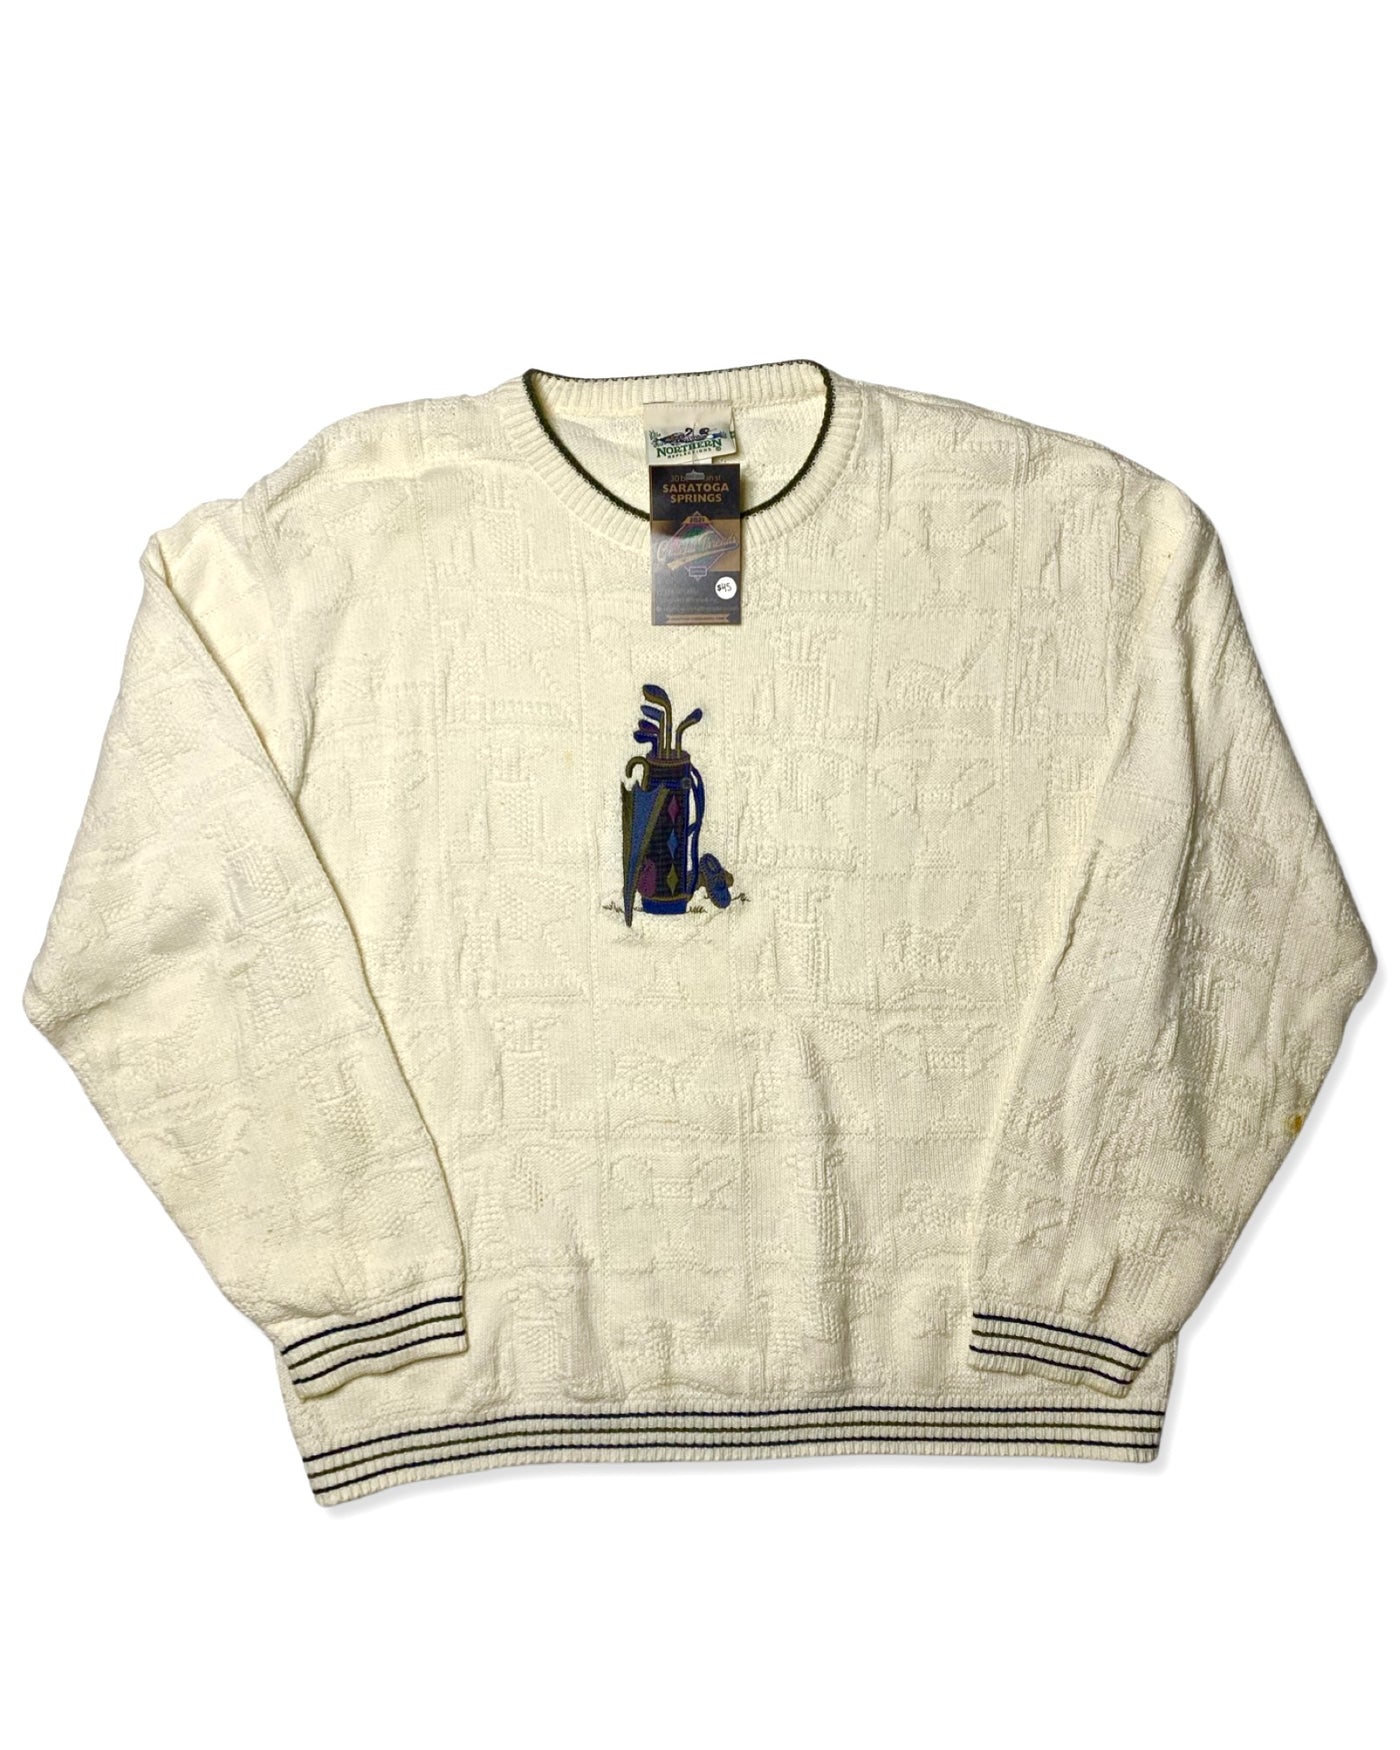 Vintage Northern Reflections Knit Golf Sweater